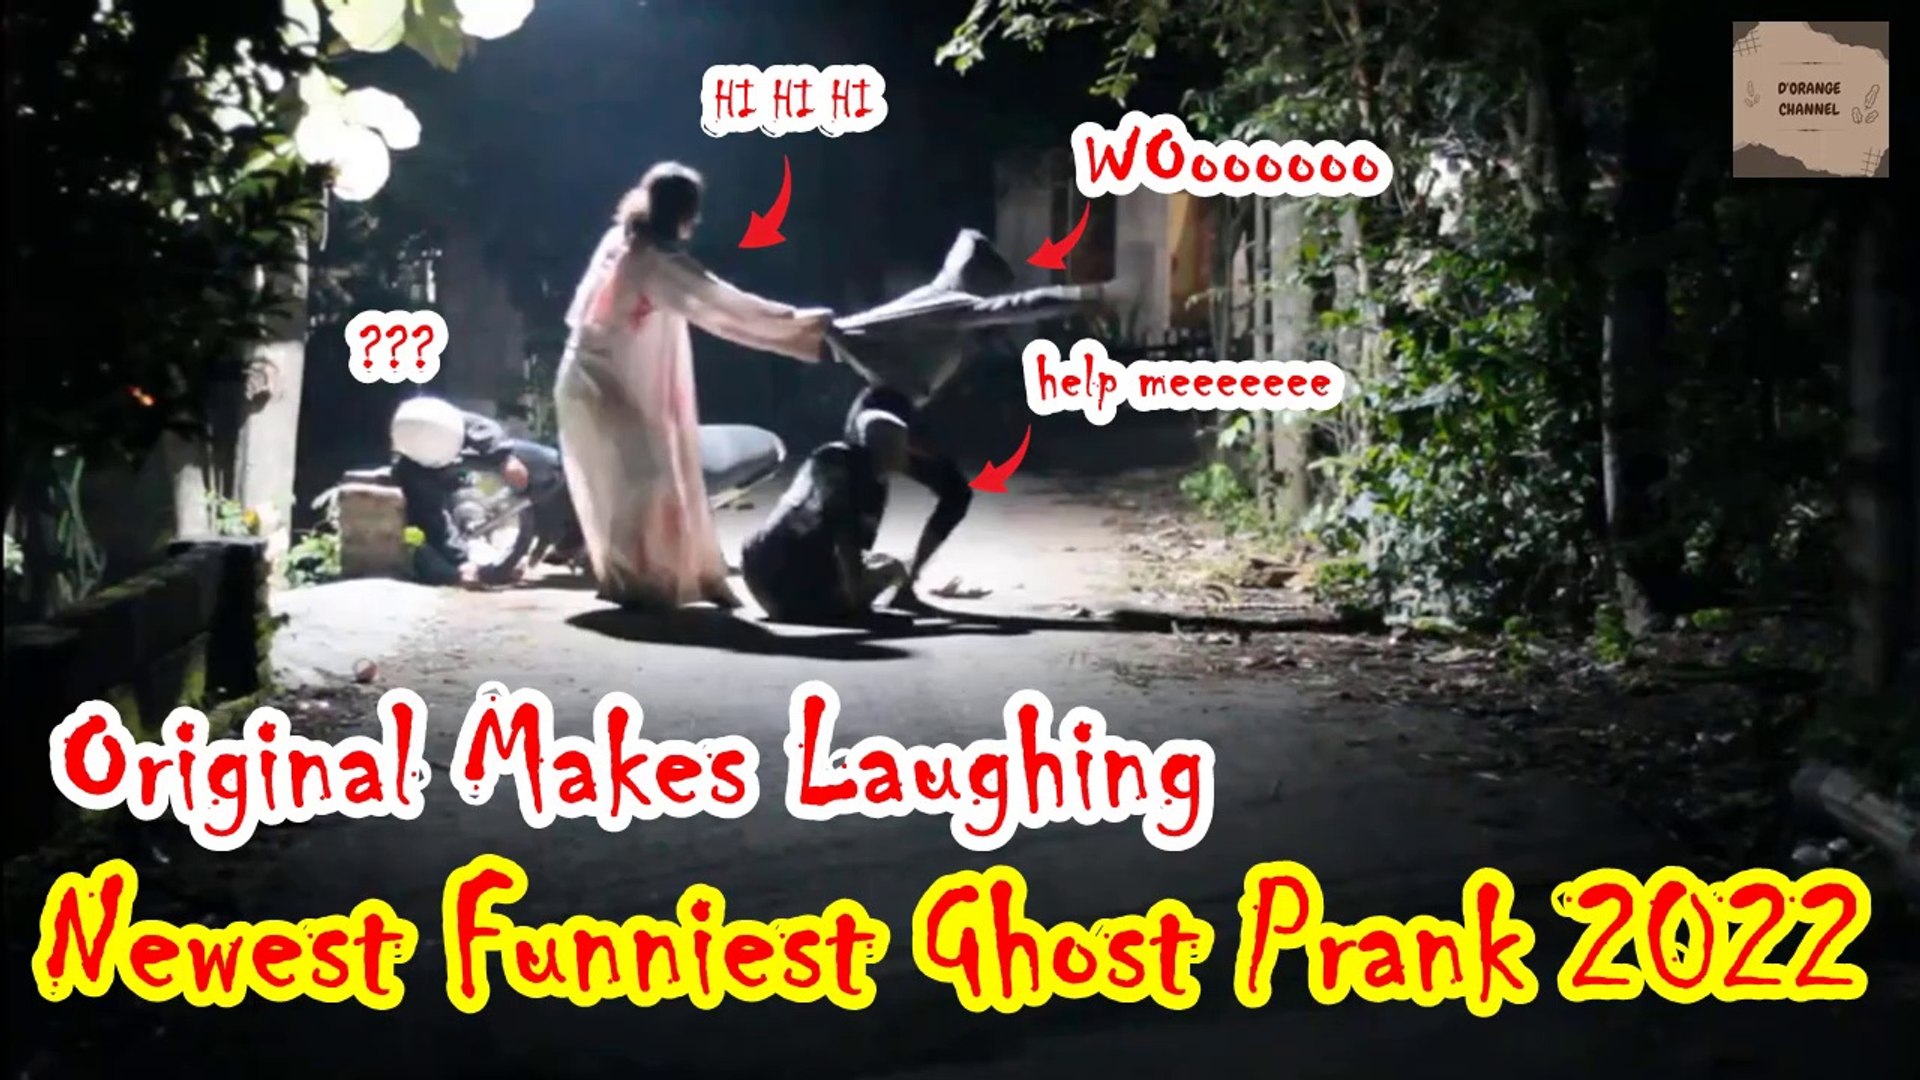 Original Makes Laughing, Newest Funniest Ghost Prank 2022